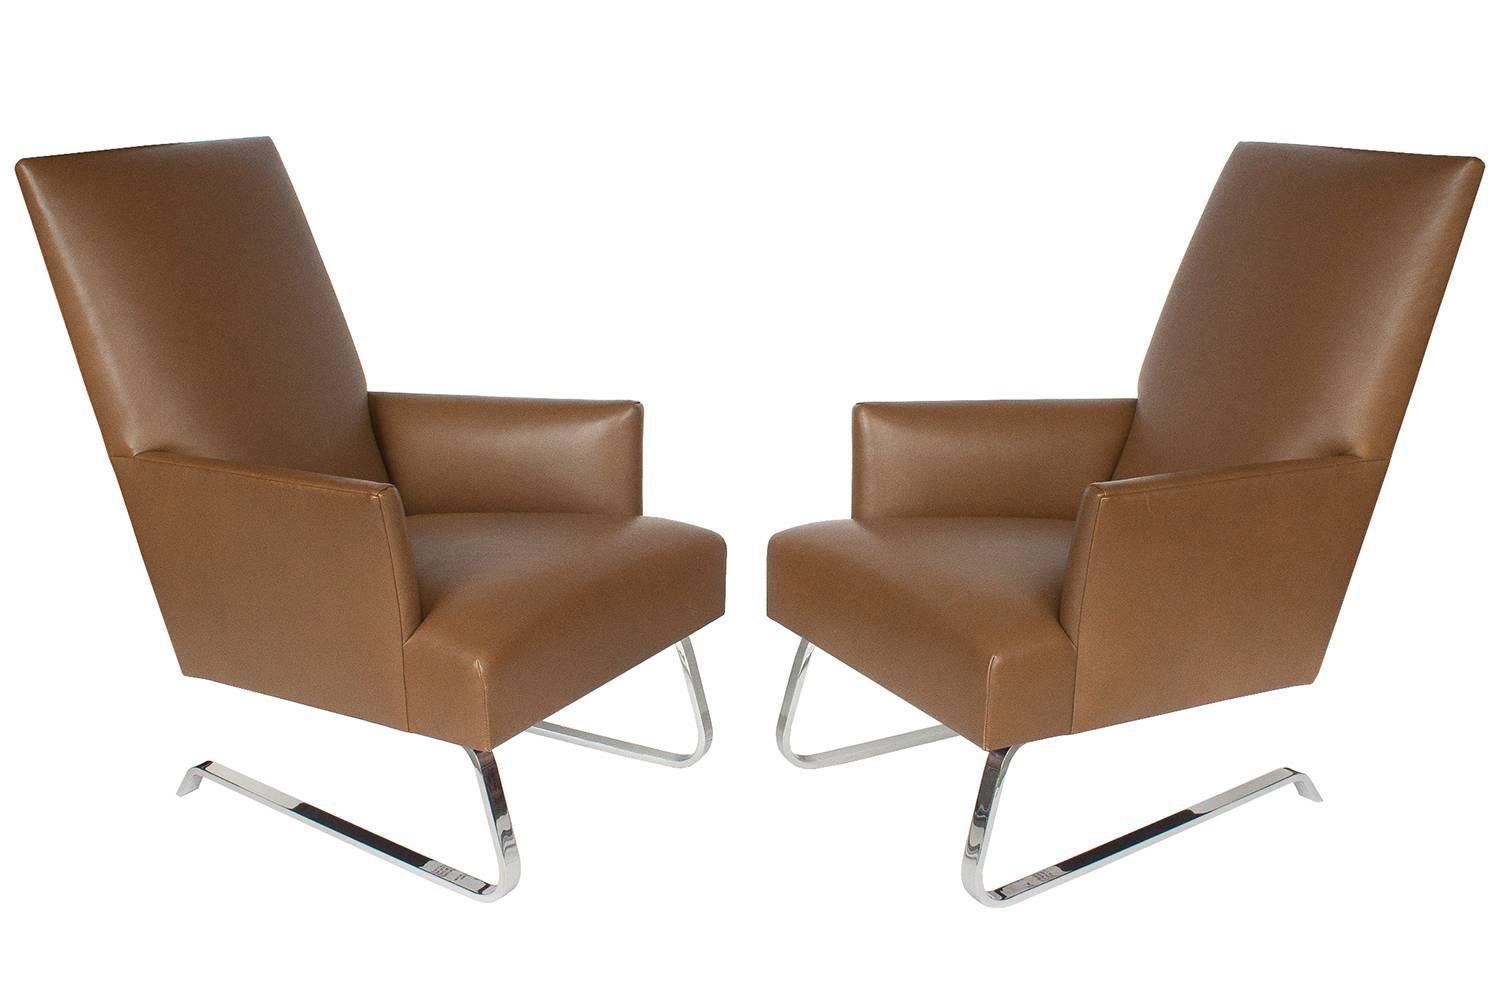 Pair of leather Odeon club lounge chairs by Donghia. Fully upholstered chair with tight seat and back. The upholstered frame is raised on a formed and polished chromed steel cantilever base. Upholstered in a light caramel brown leather. Leather